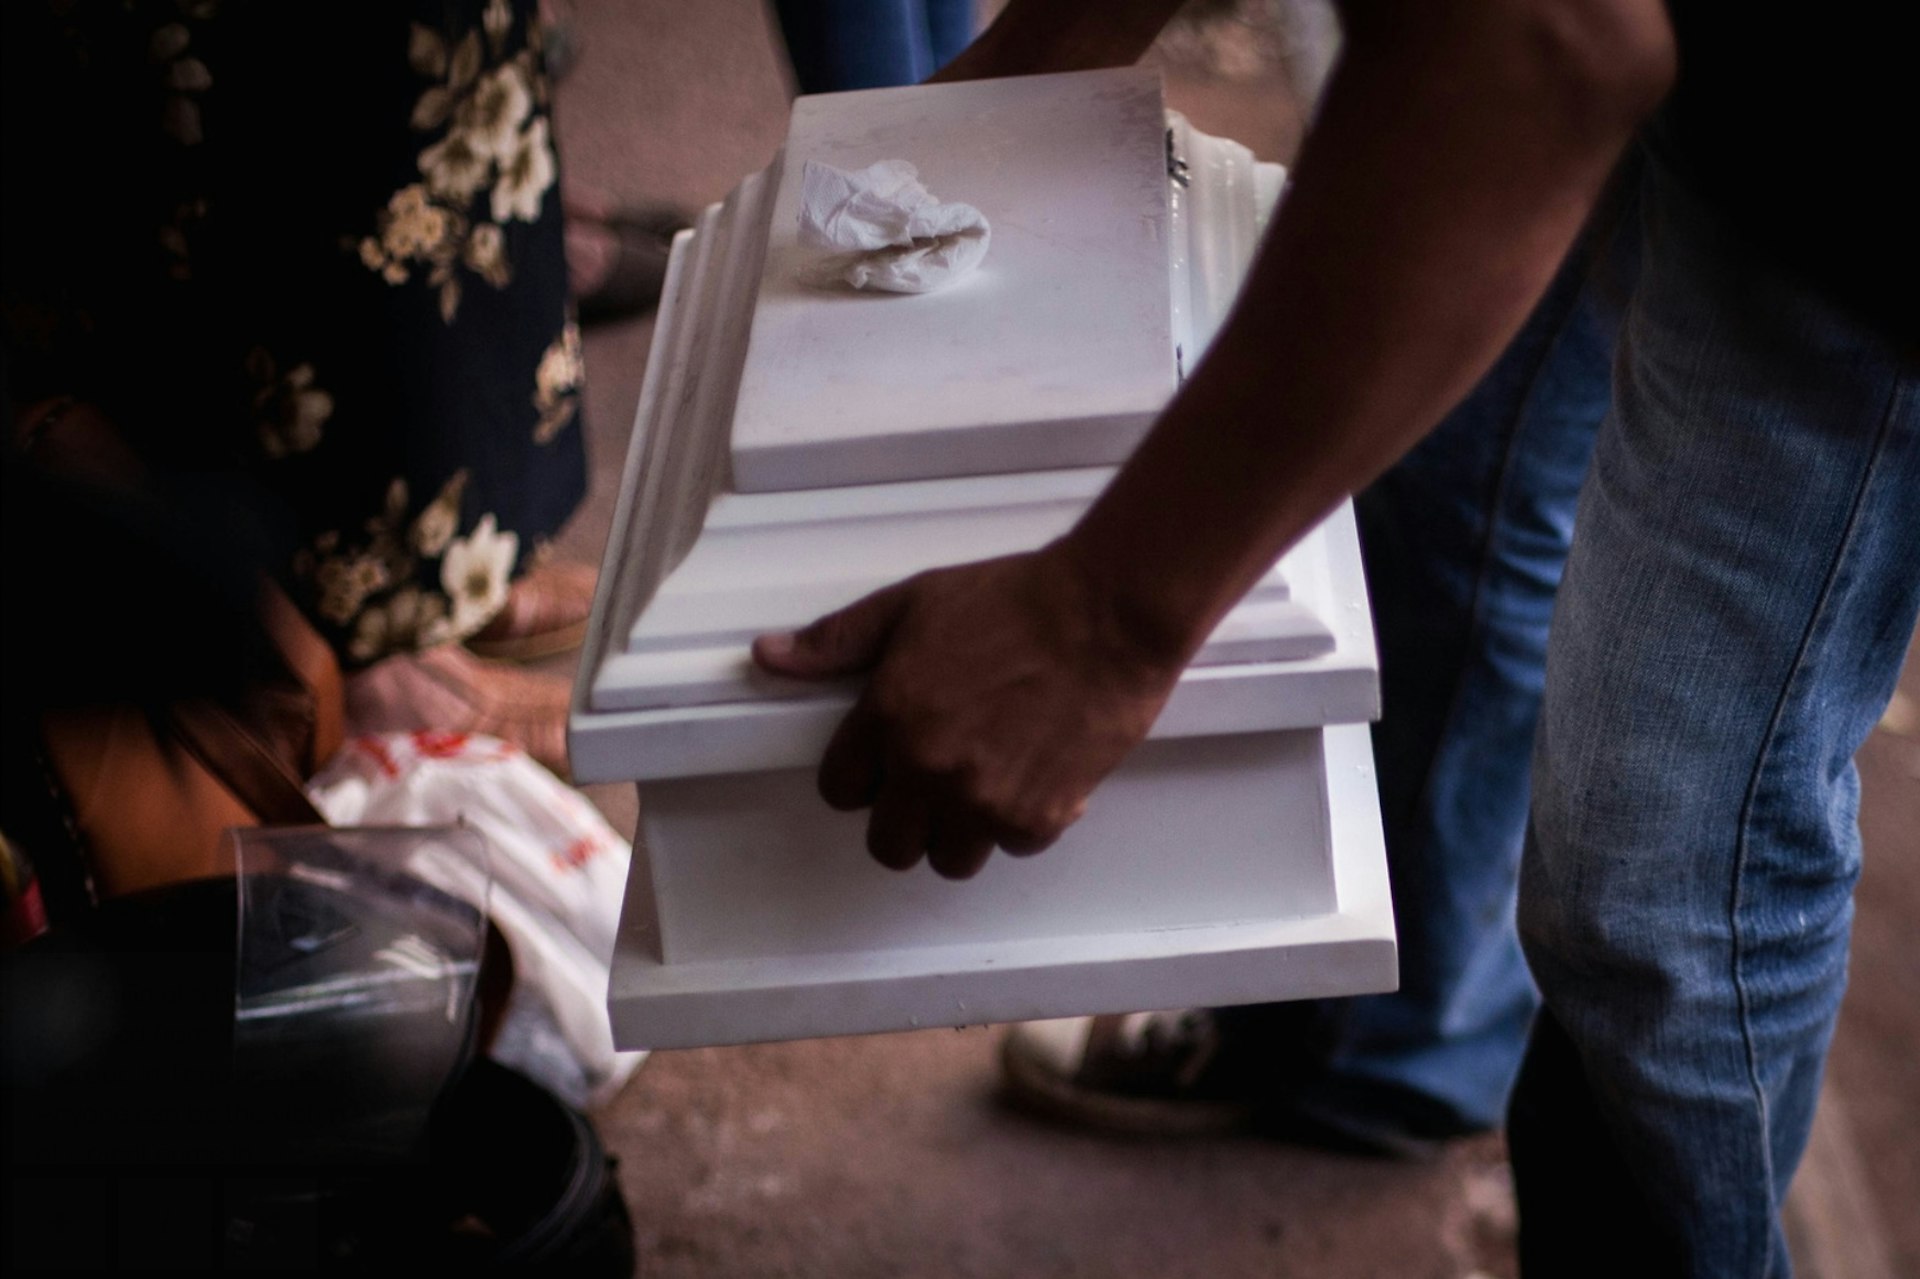 The coffin of a baby is removed from the forensic morgue in Tegucigalpa. 11th August 2017.